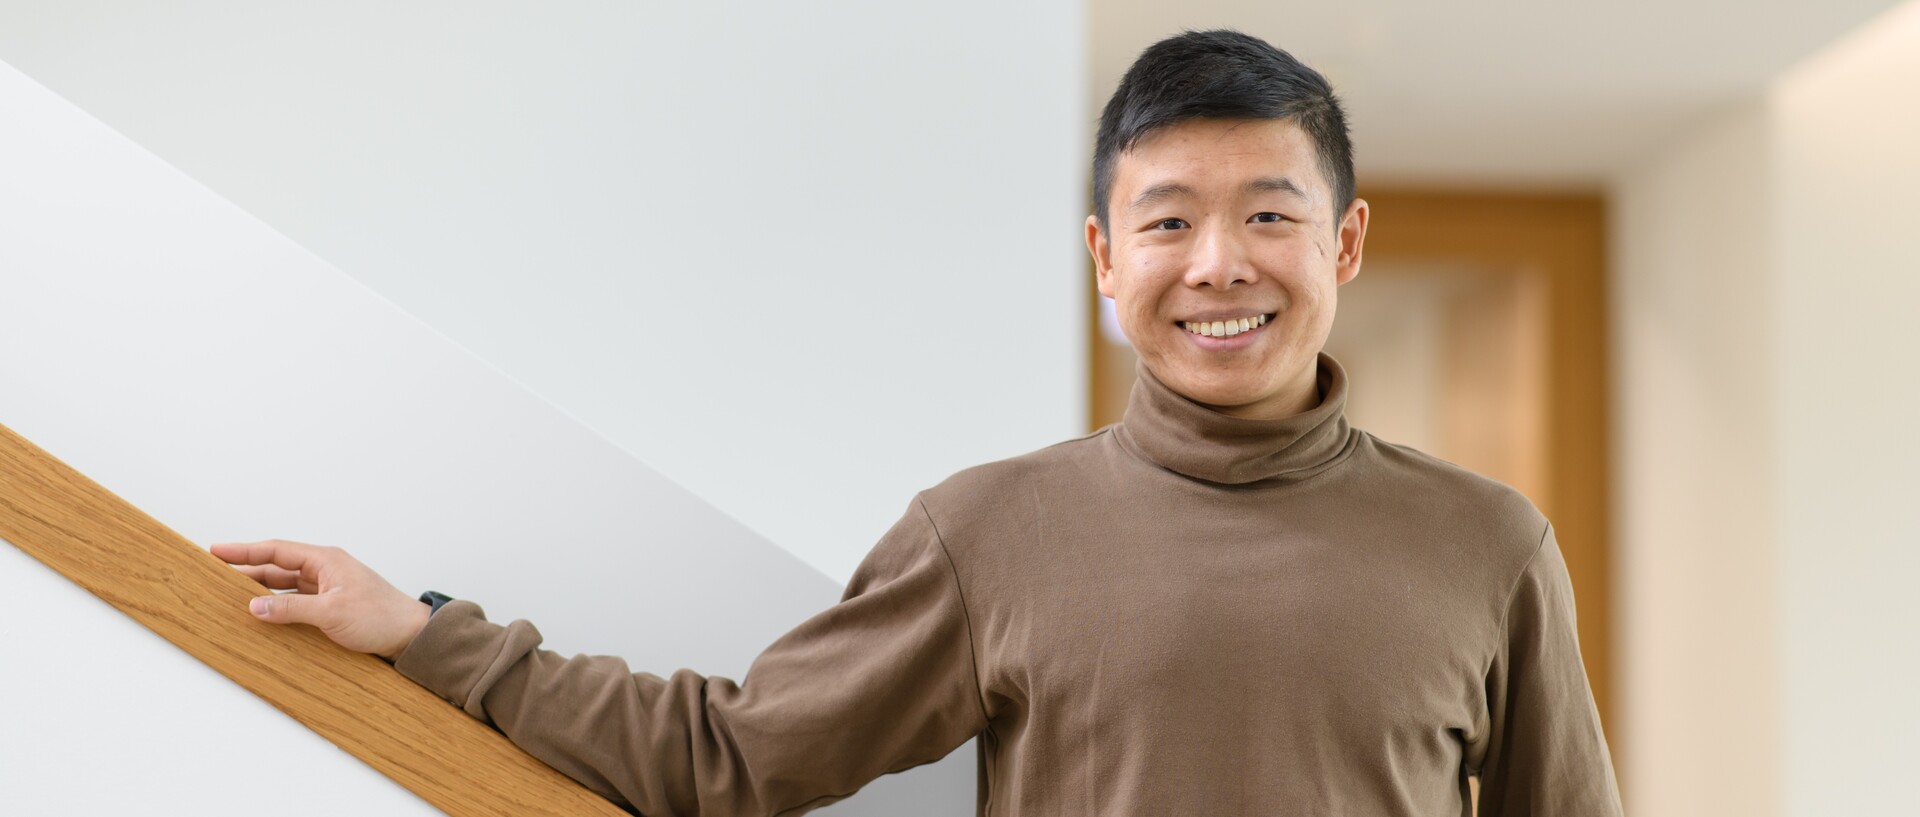 Jianming Cui stands smiling in a hallway. He is wearing a light brown turtleneck sweater.